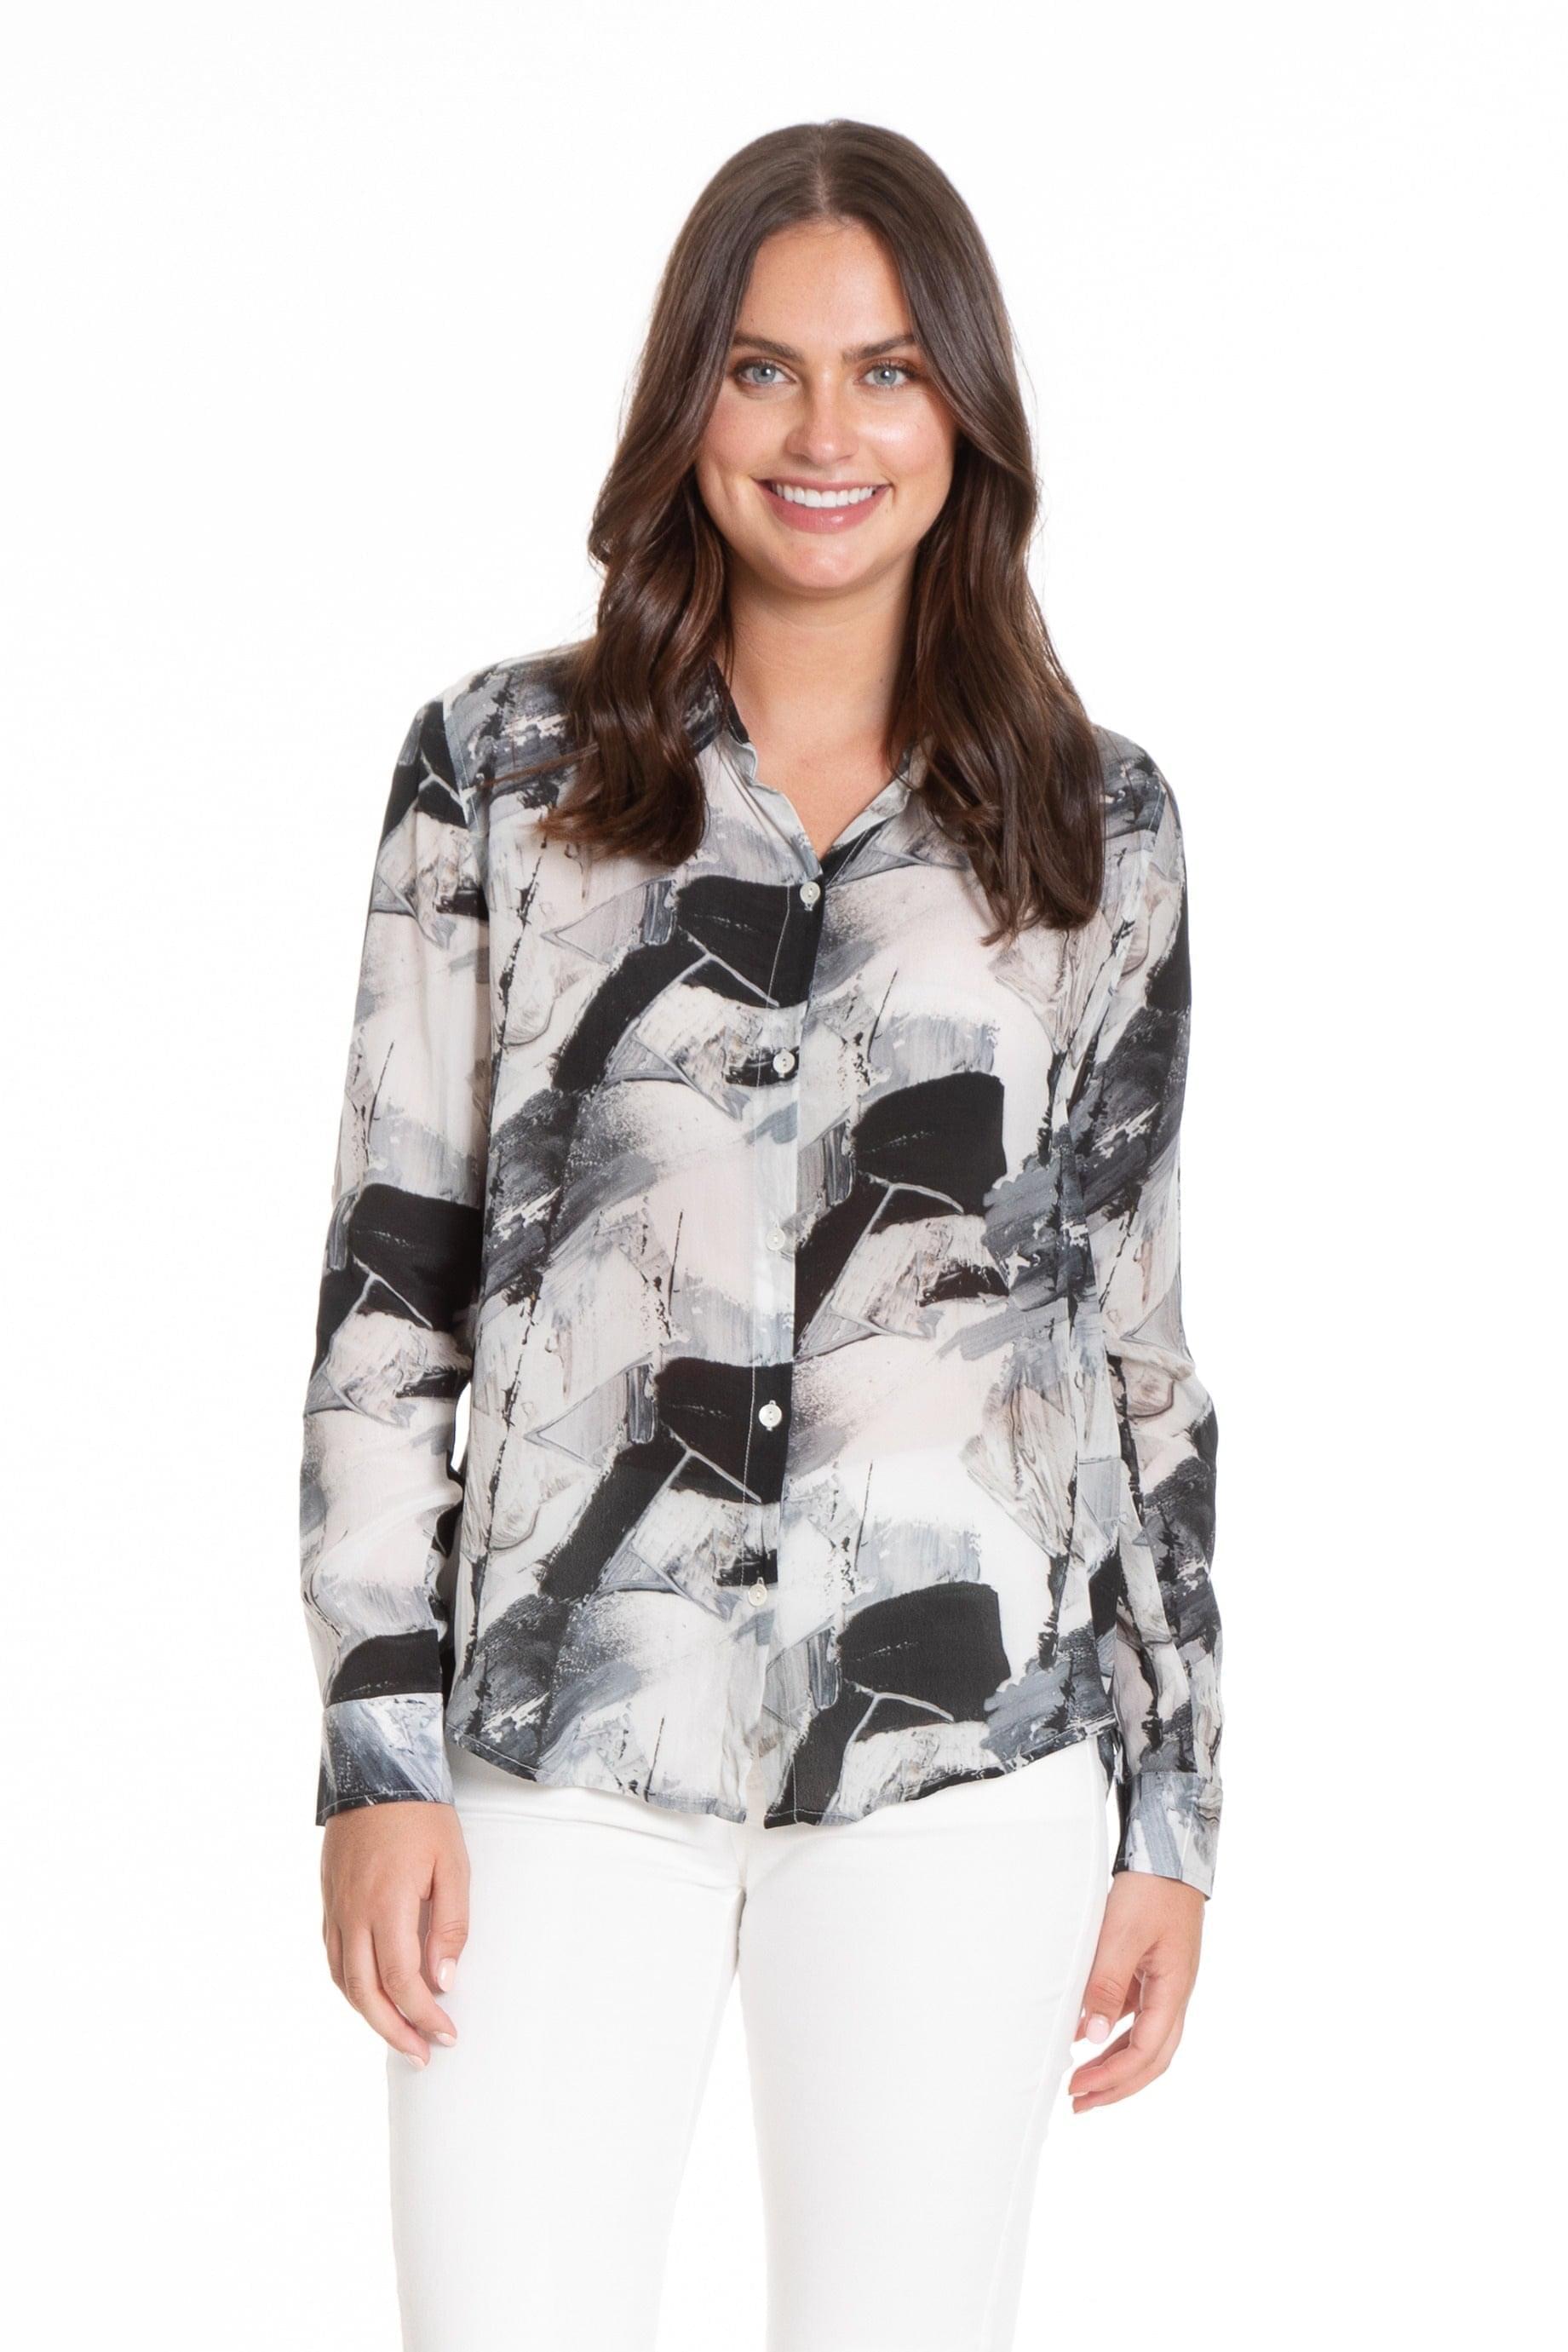 Black & White Abstract - Button-up with Roll-up Sleeve Front APNY